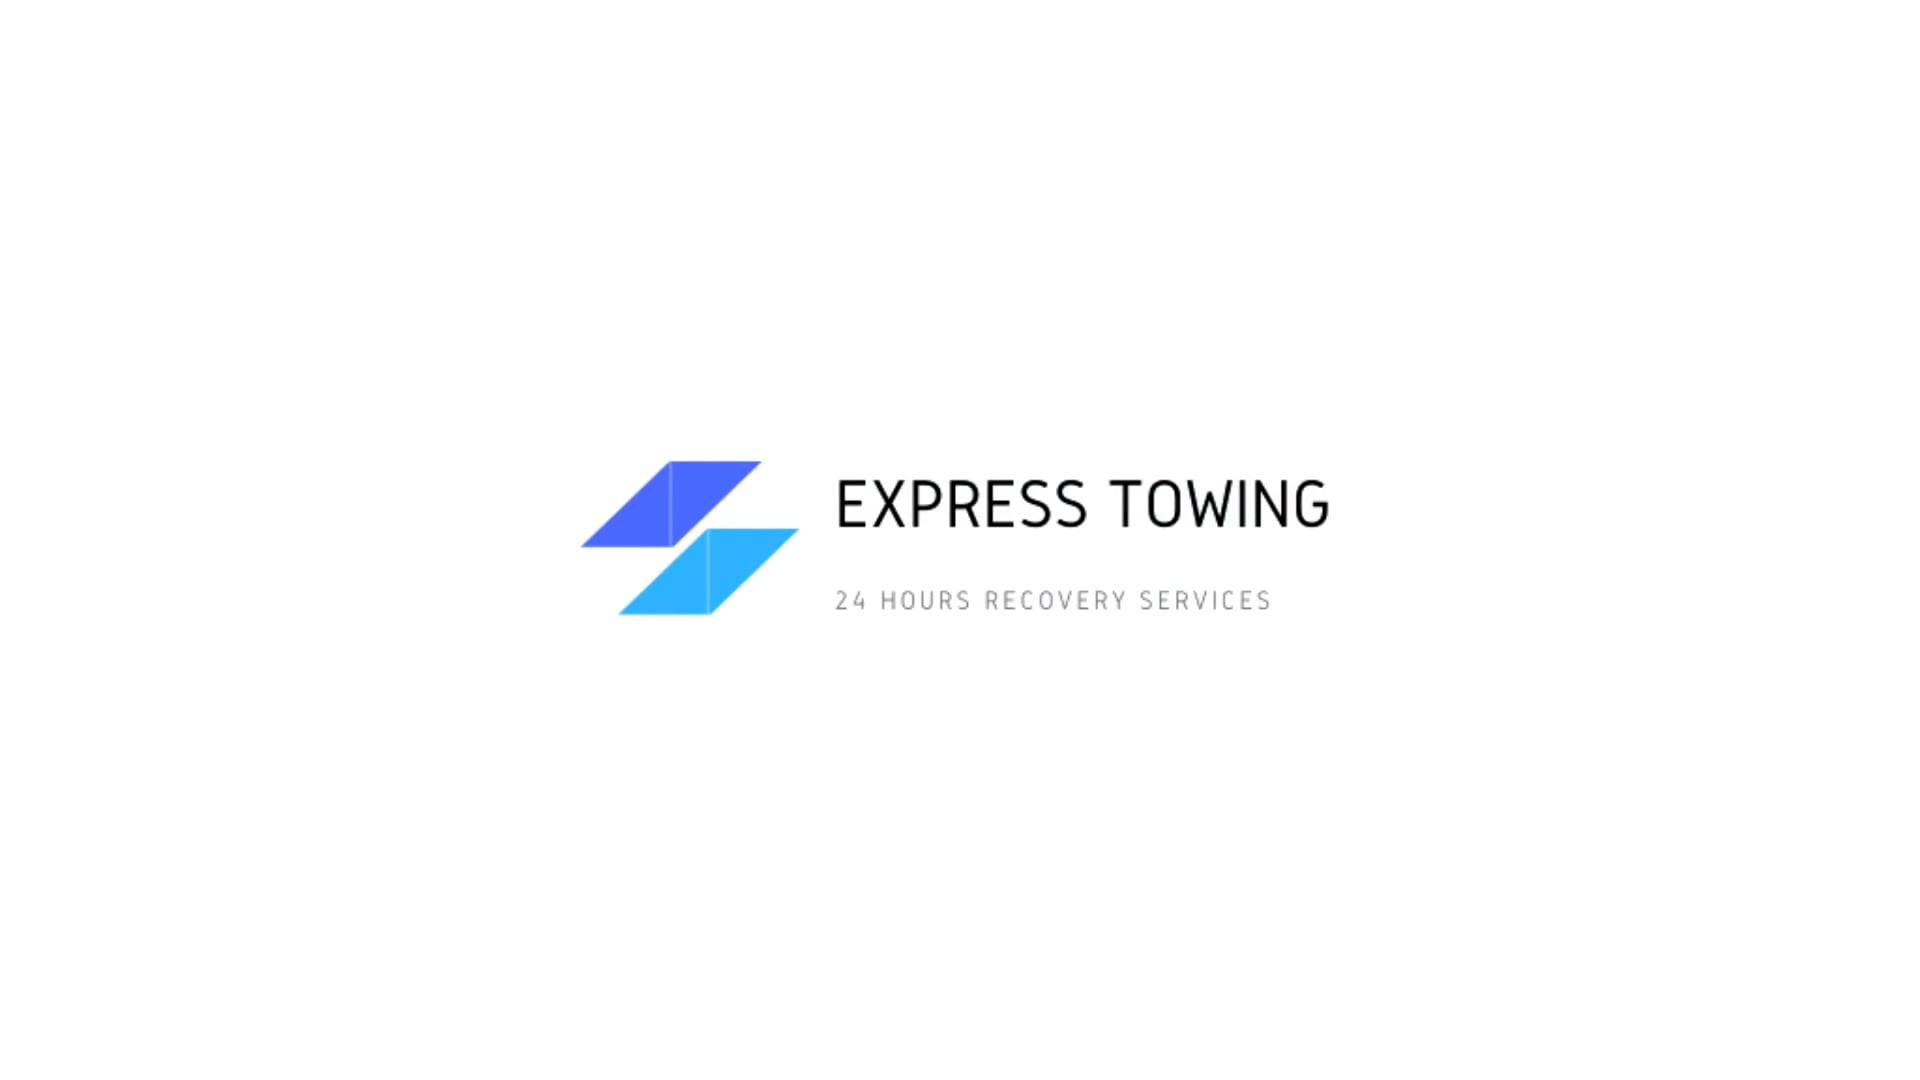 EXPRESS TOWING SINGAPORE | SERVICES INTRODUCTION